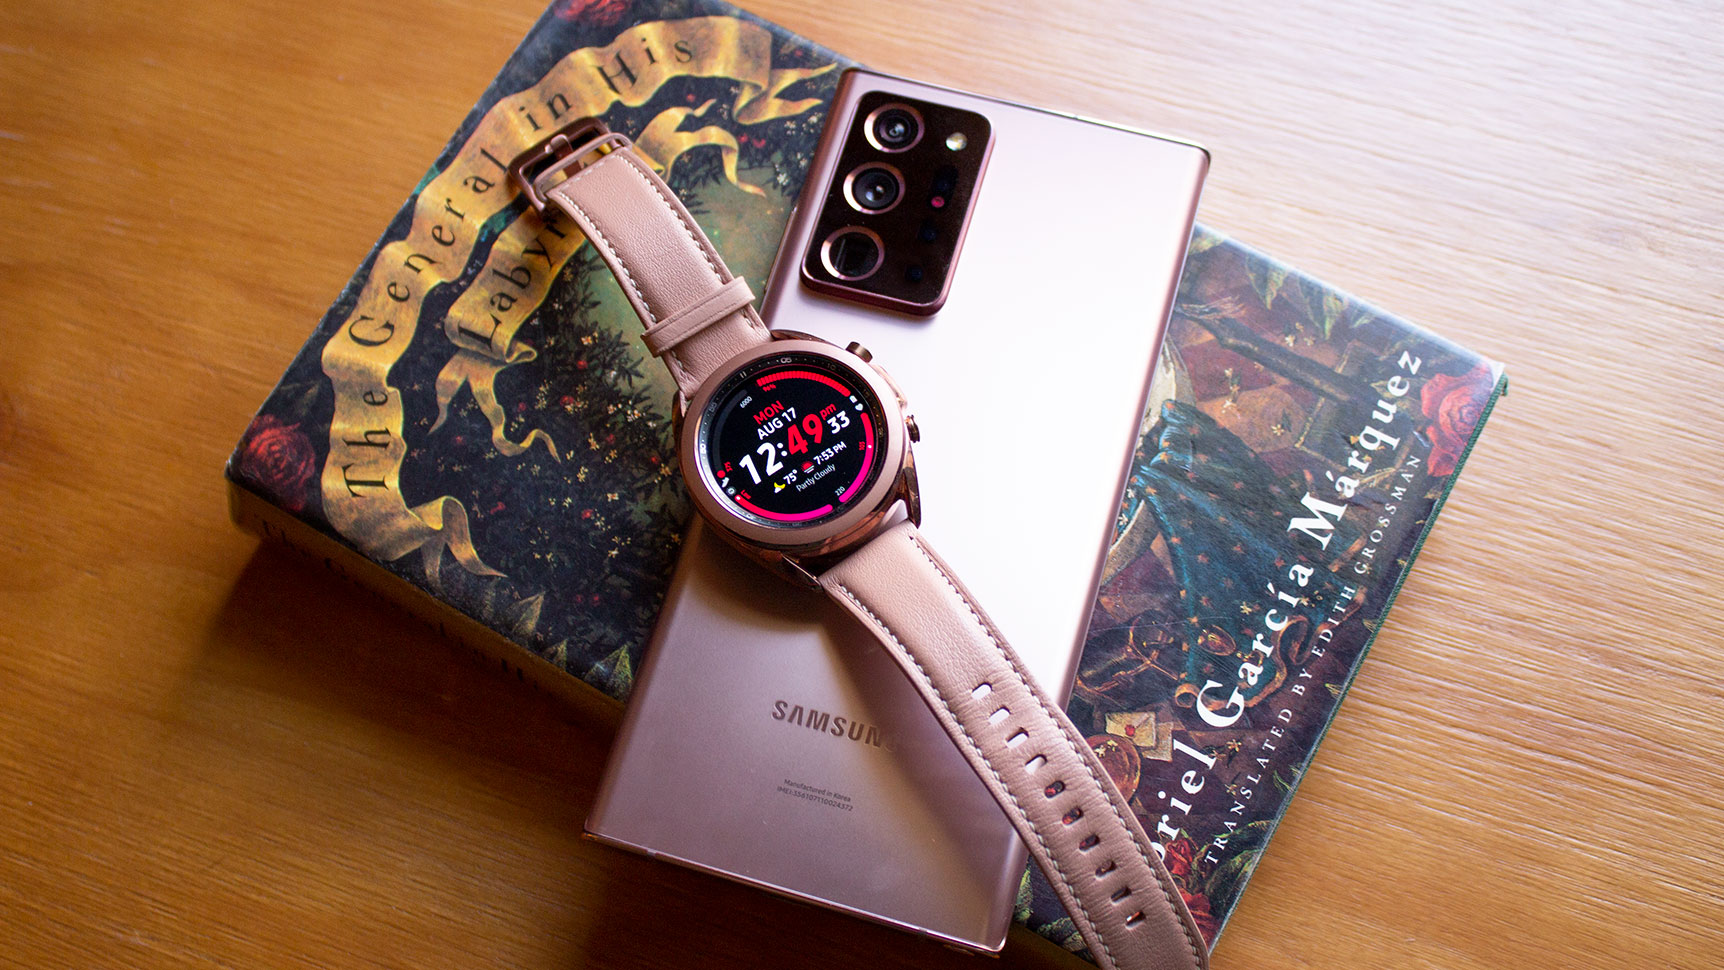 The Mystic Bronze colour grew on me. Also, the watch will work best with a Samsung phone, though a majority of the features will also work with non-Samsung Android devices. iPhones will offer a slightly more limited experience. (Photo: Victoria Song/Gizmodo)